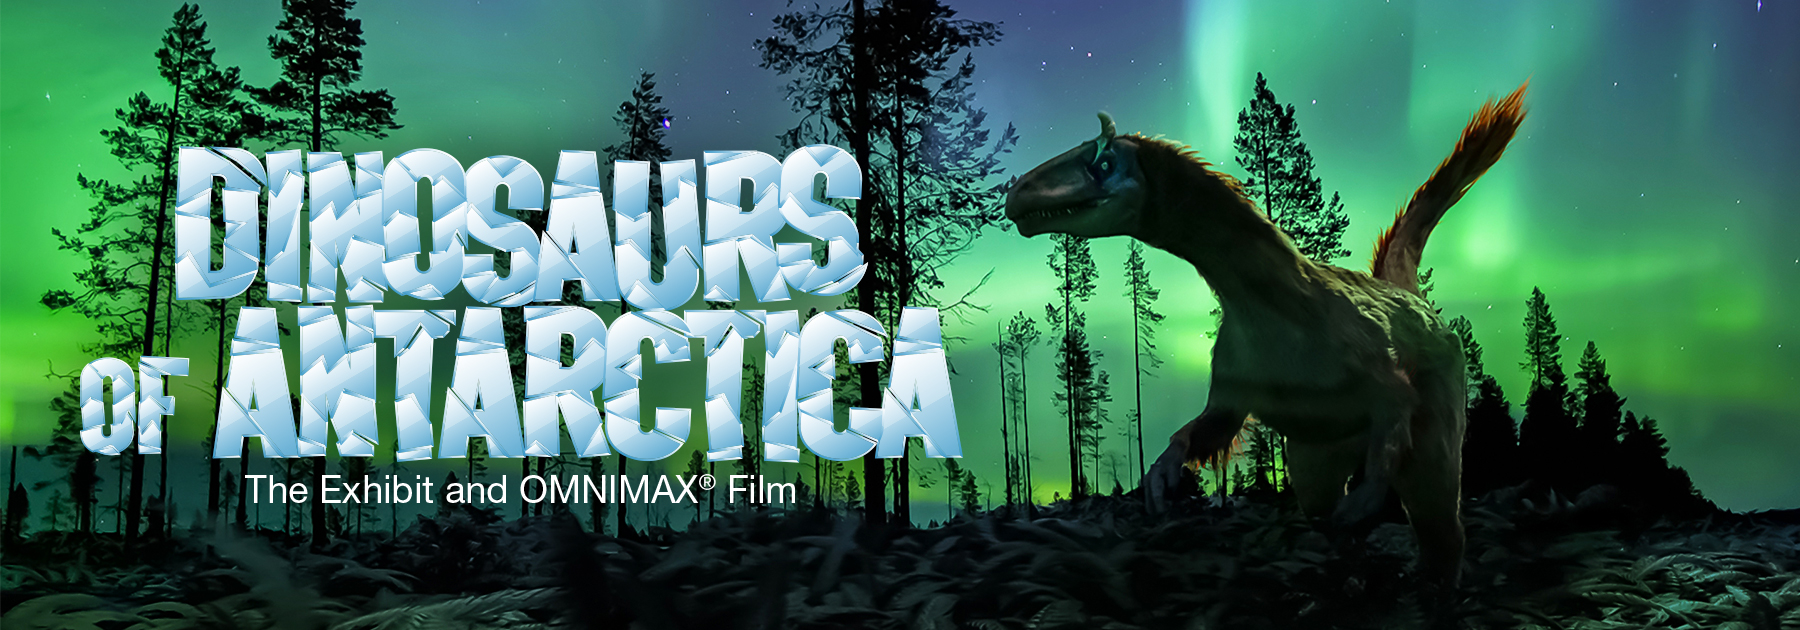 Promotional image from Dinosaurs of Antarctica exhibit